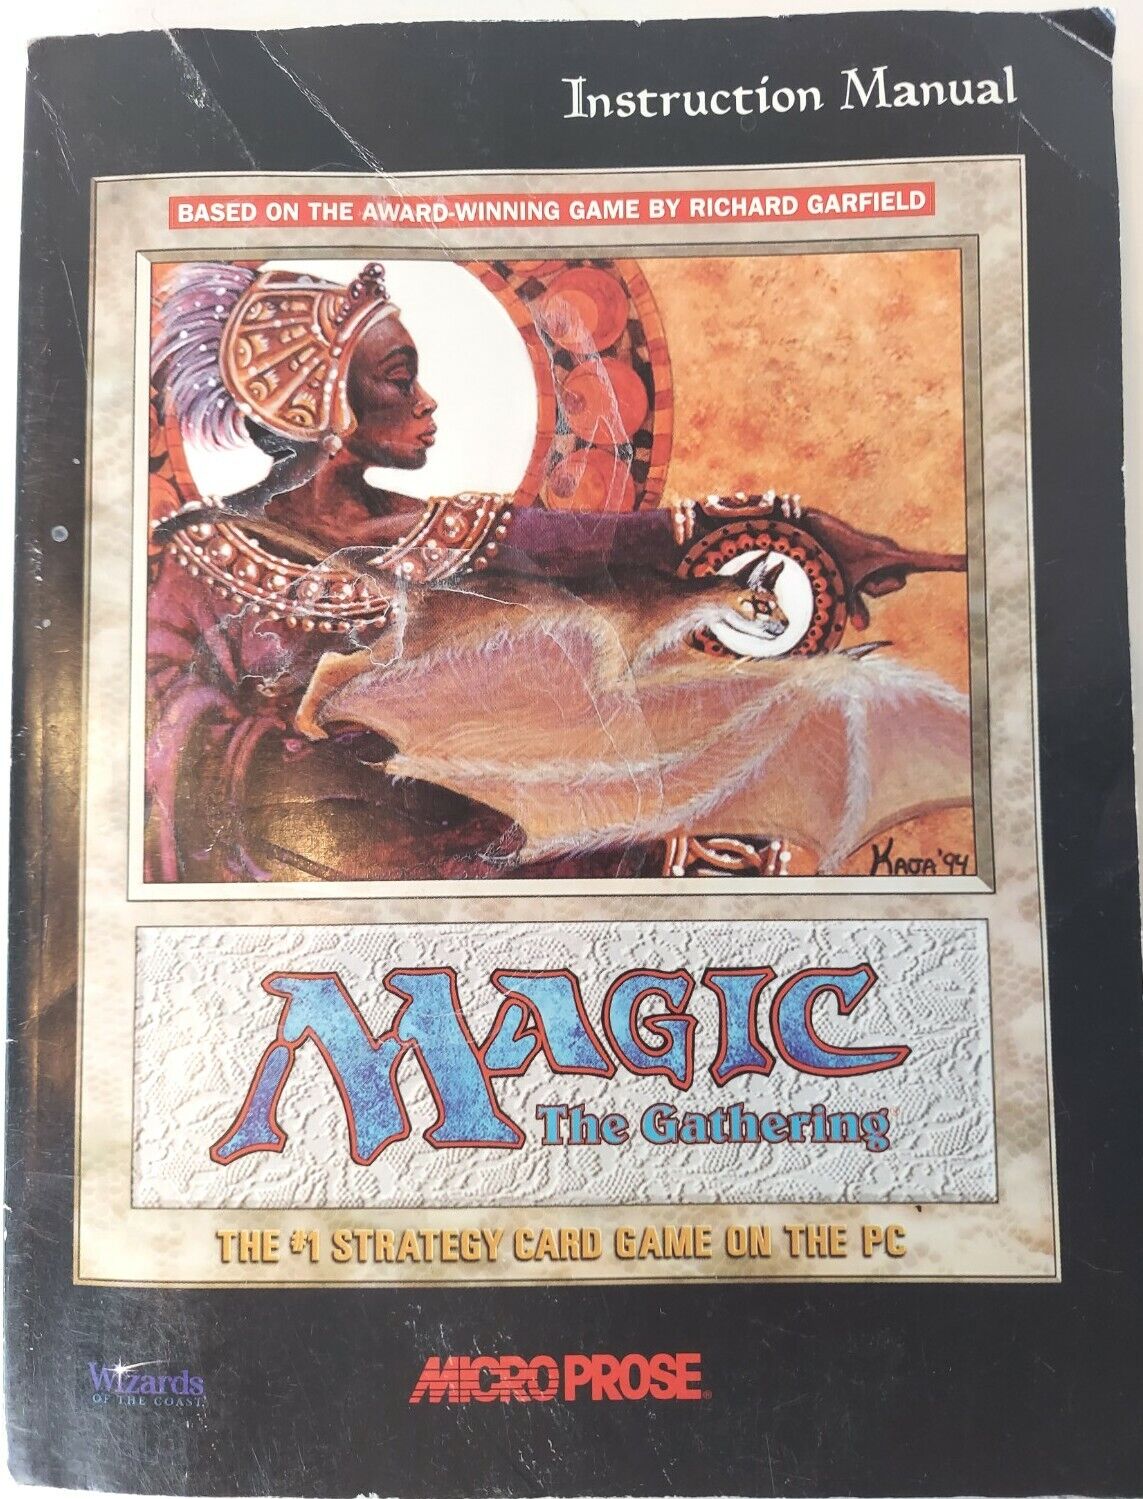 Vintage Magic The Gathering PC Game Instruction Manual ONLY 1997